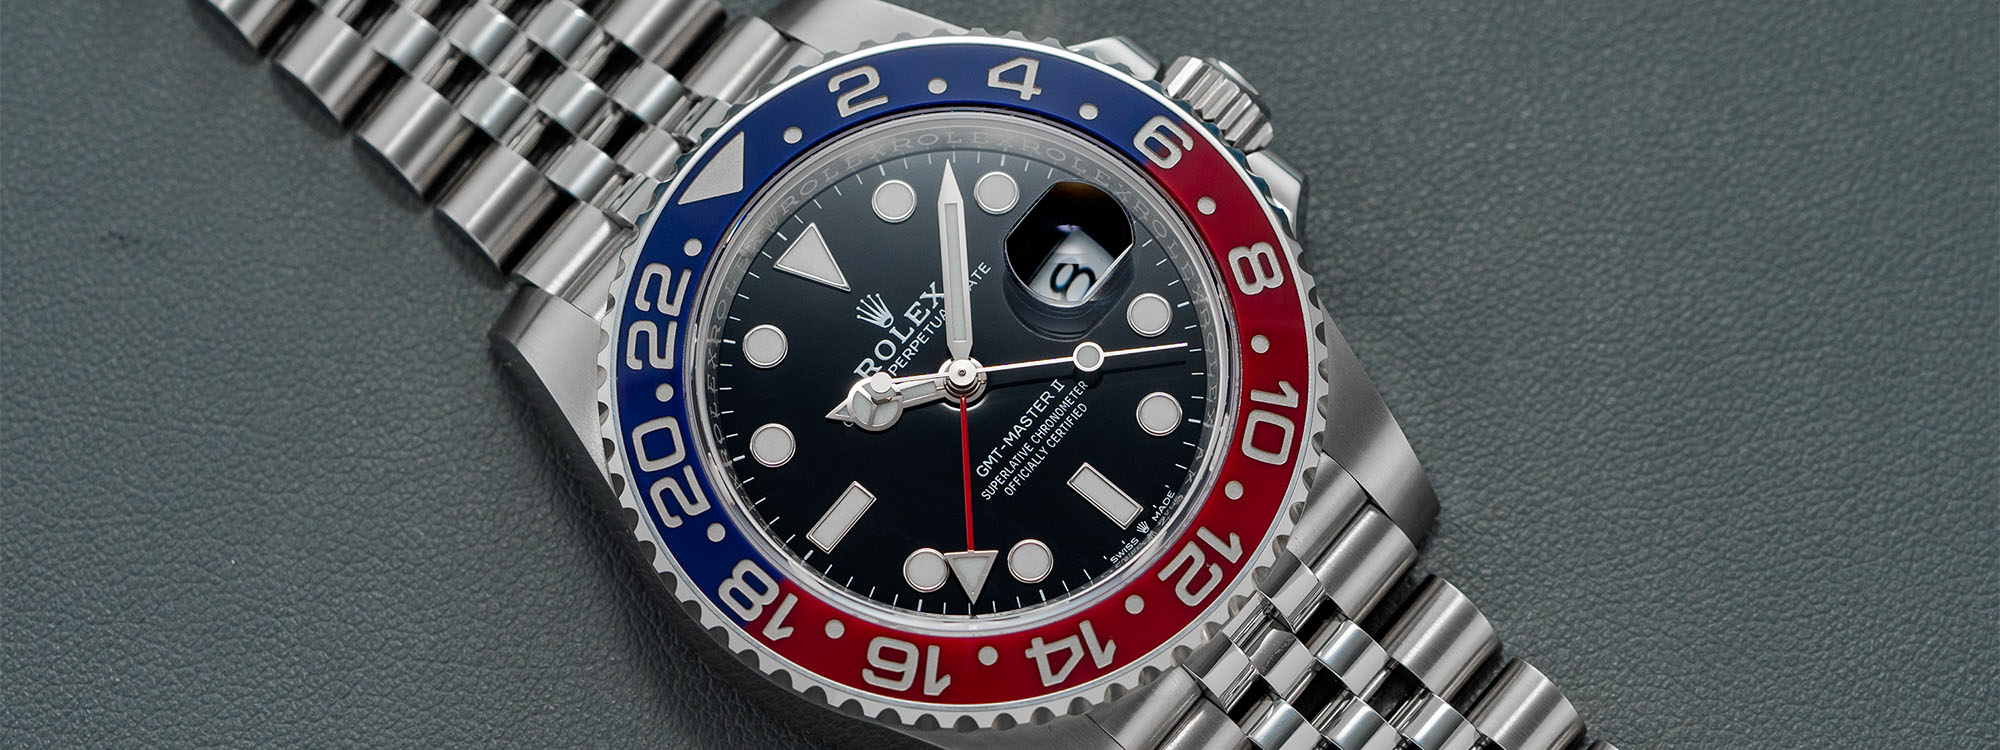 The Best Rolex Watches for Collectors and the Behind Them | Teddy Baldassarre